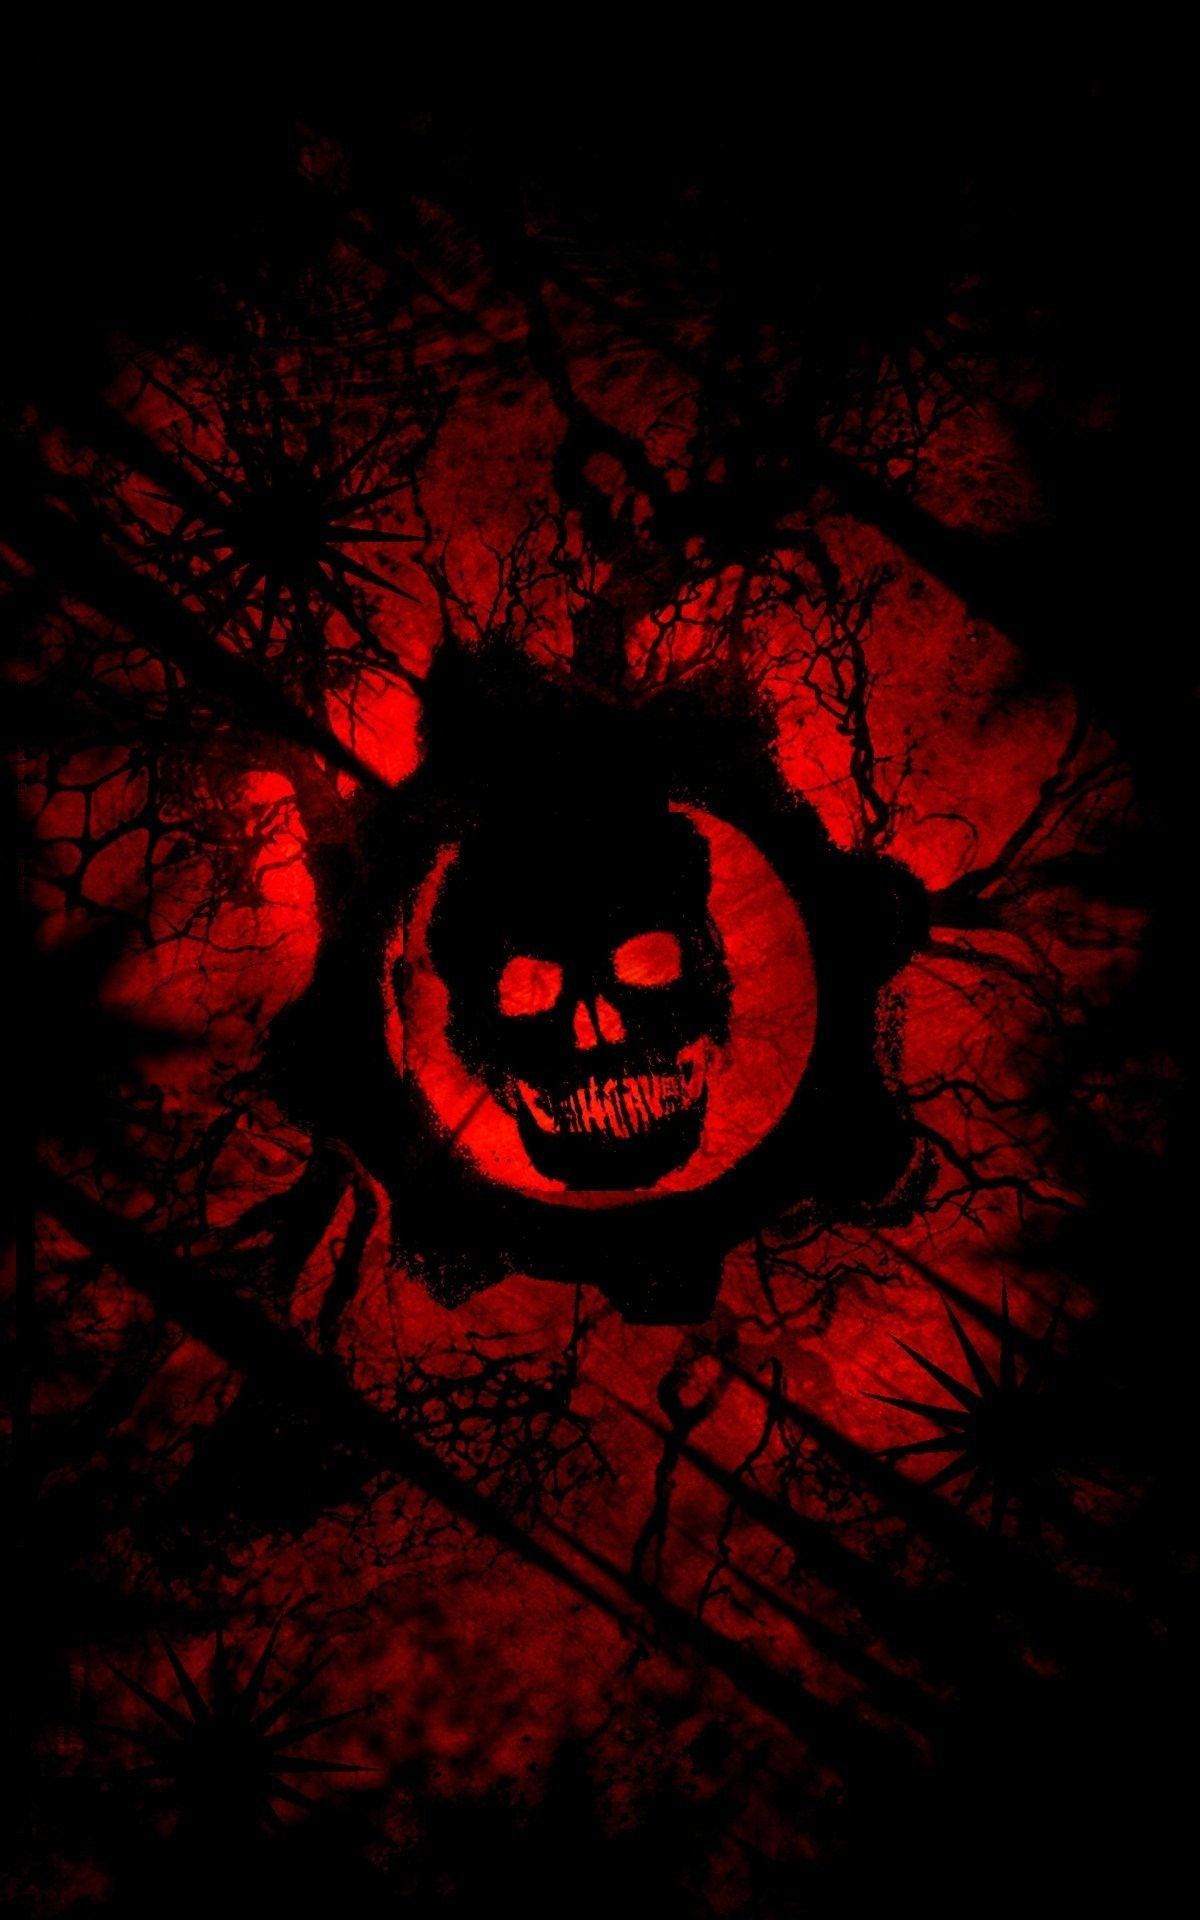 Gears of war wallpaper for android phone 2020 - wallpaper cave | all ... - Dark red, iPhone red